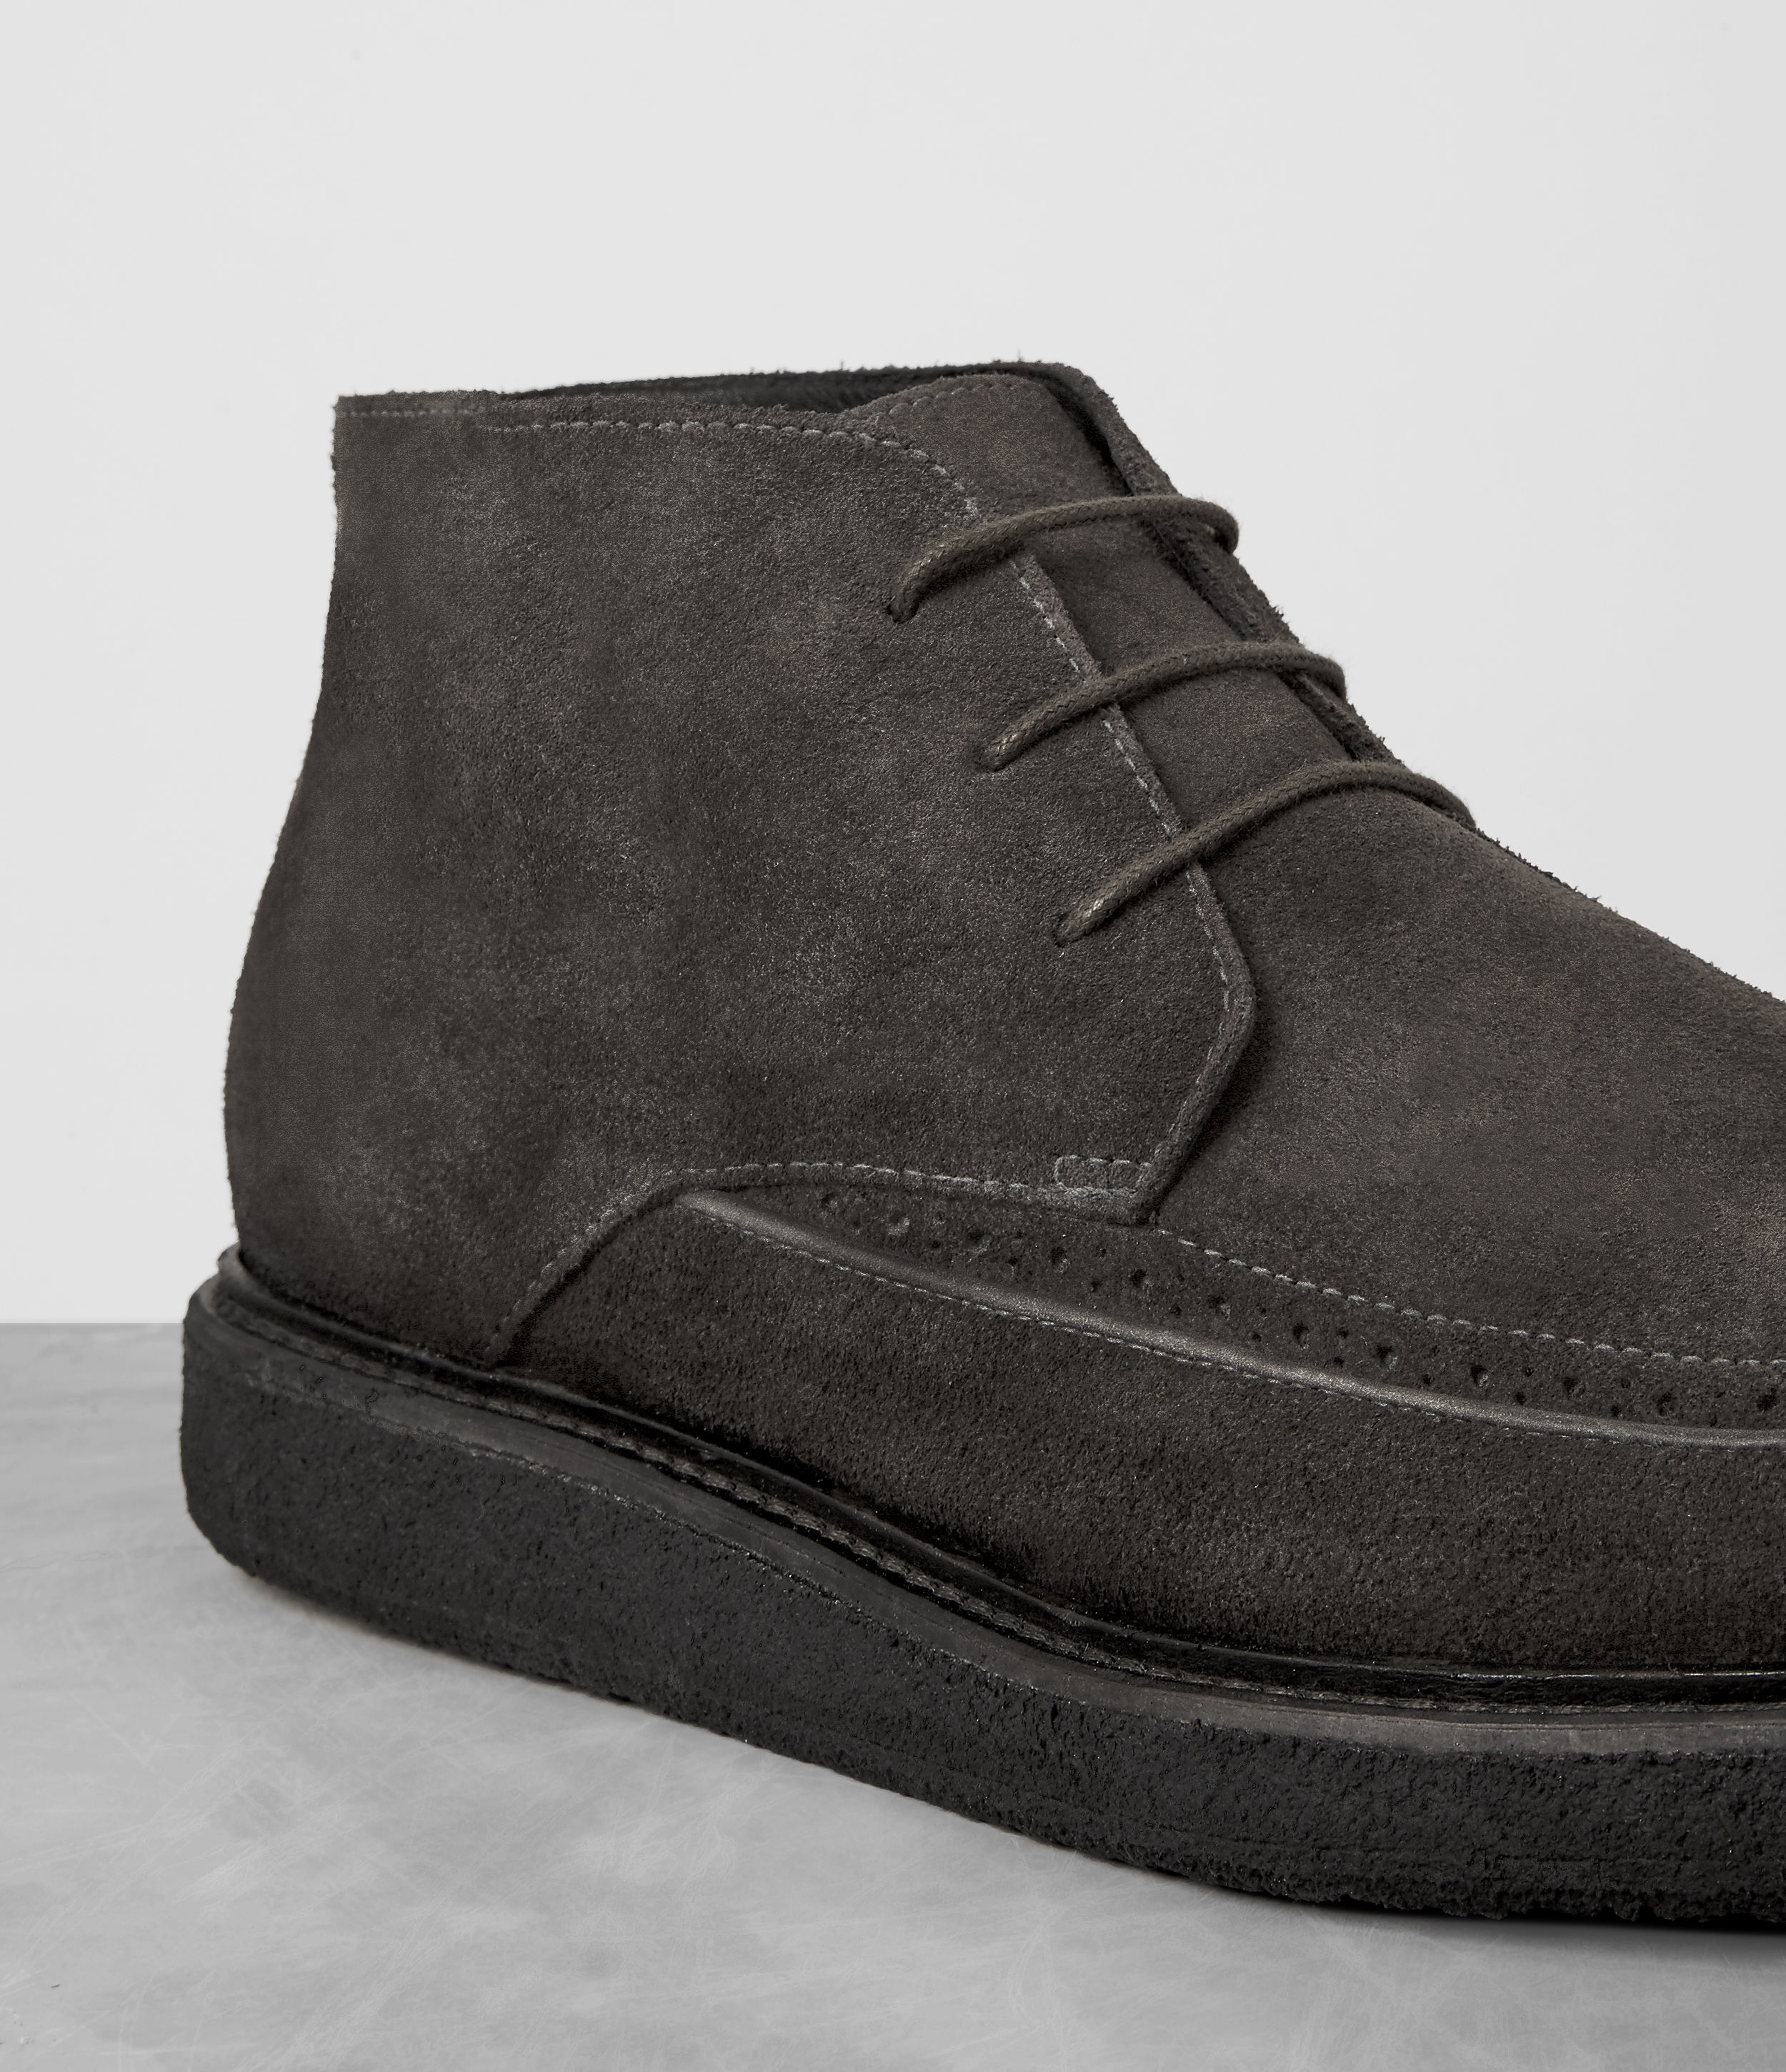 clarks black leather langdon place ankle boots